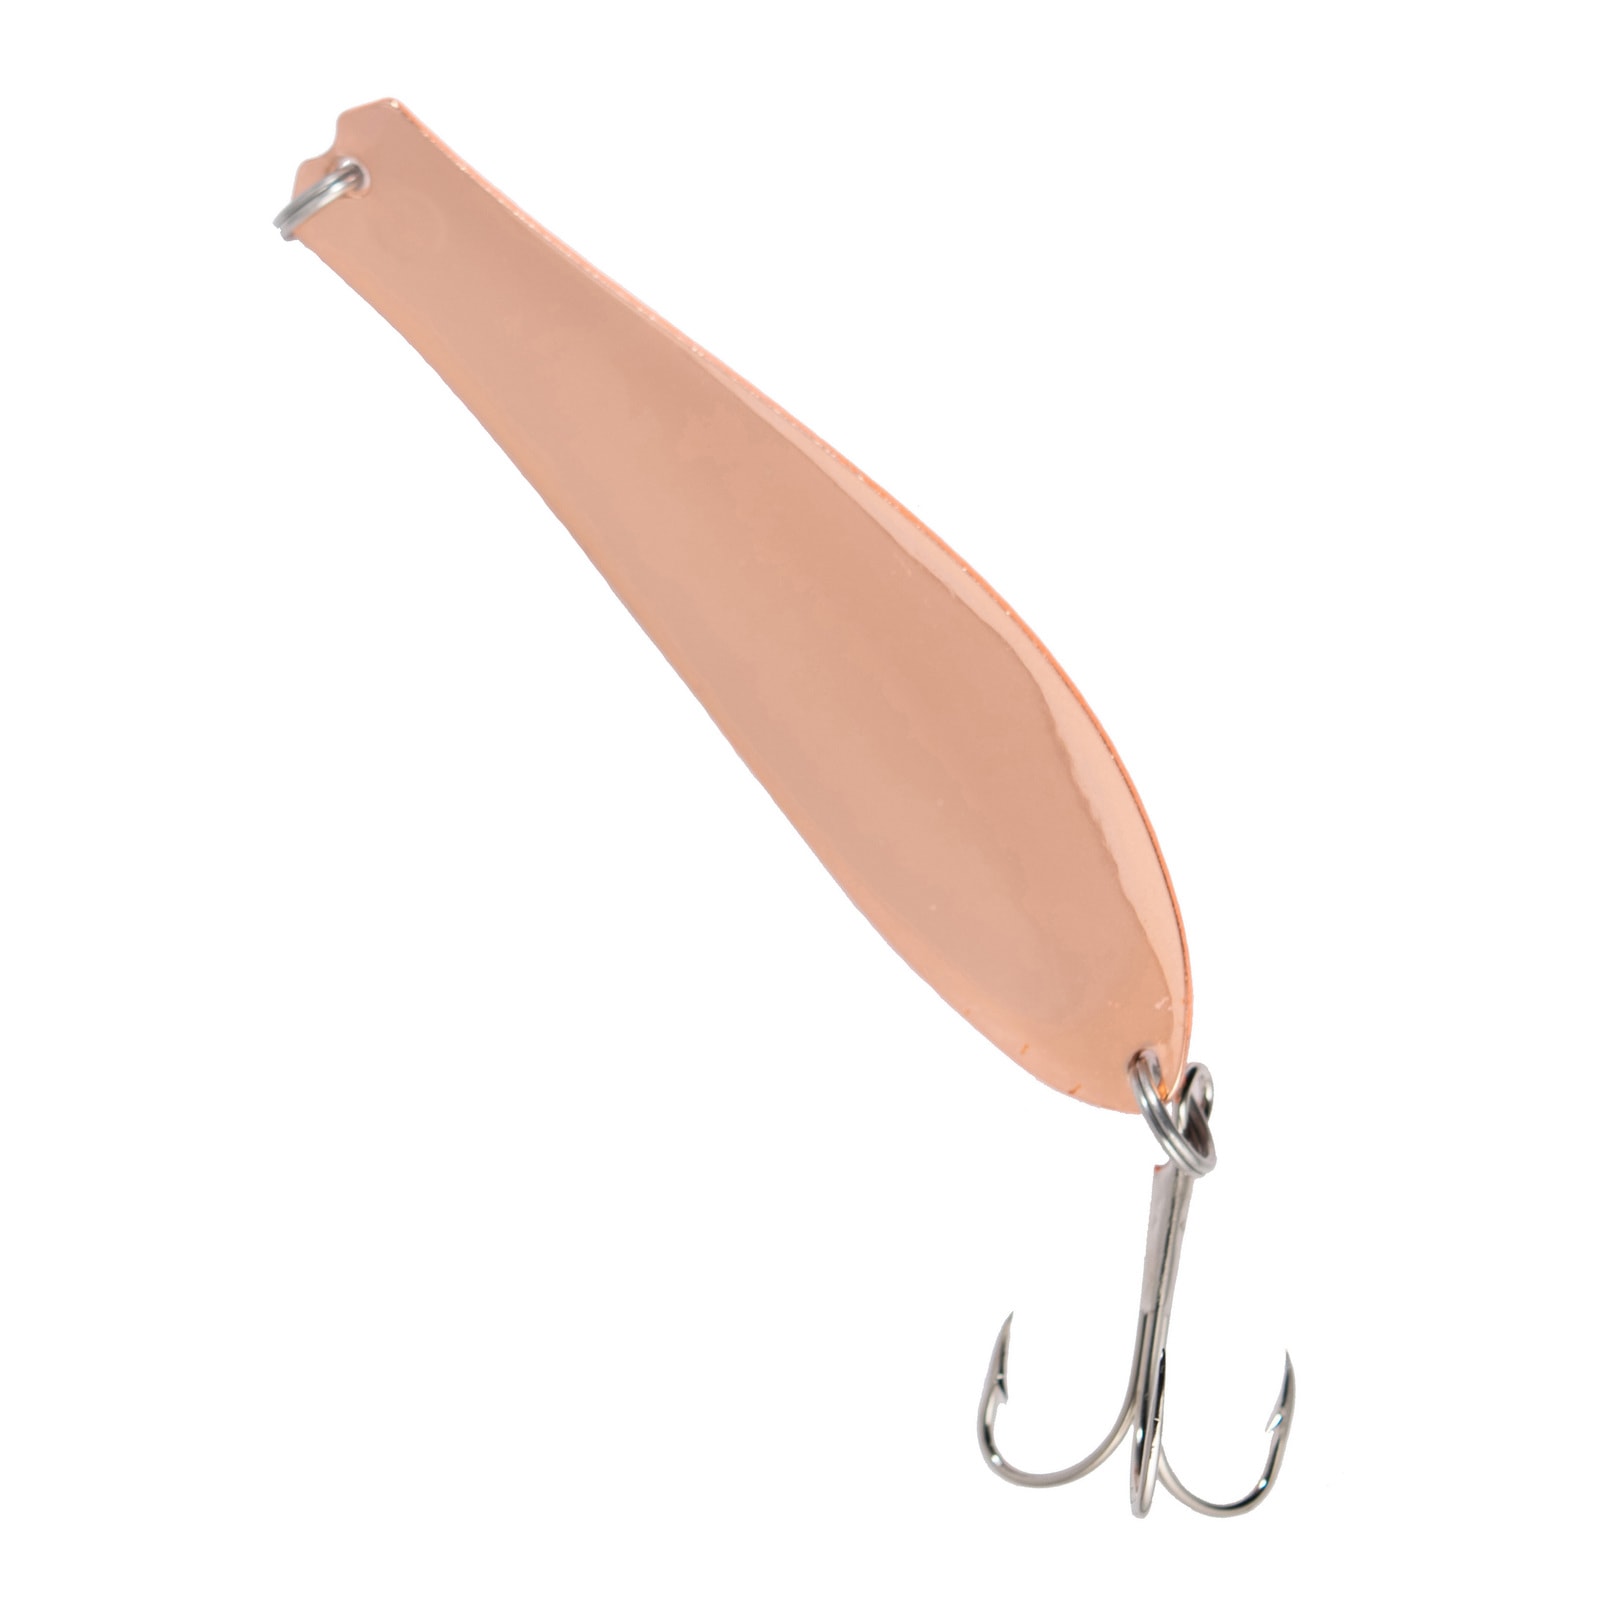 Thin Doctor Spoon in (103) Copper - Yellow Bird Fishing Products